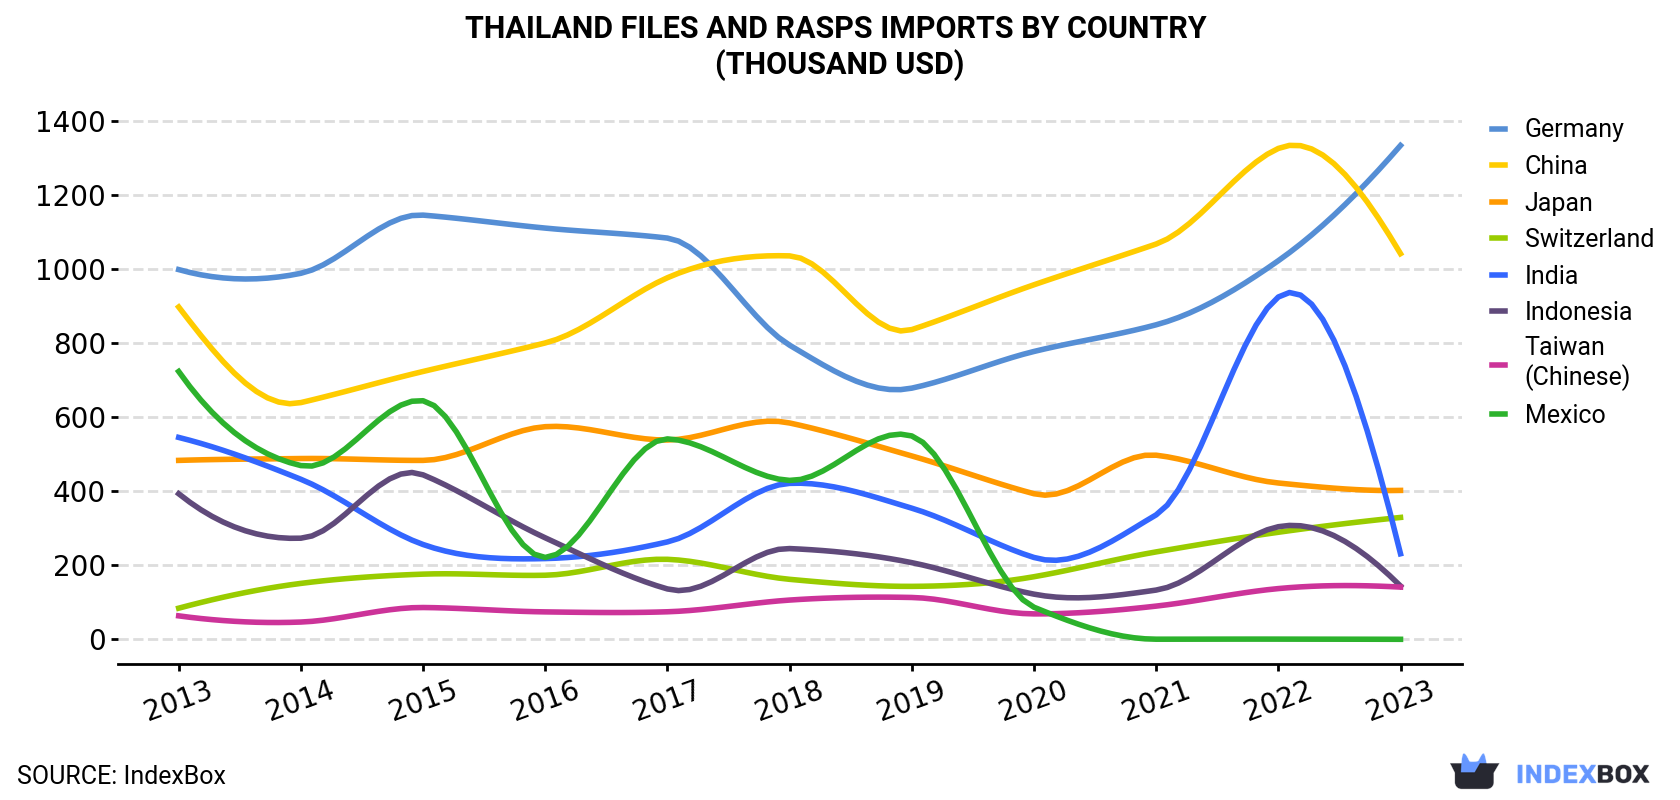 Thailand Files And Rasps Imports By Country (Thousand USD)